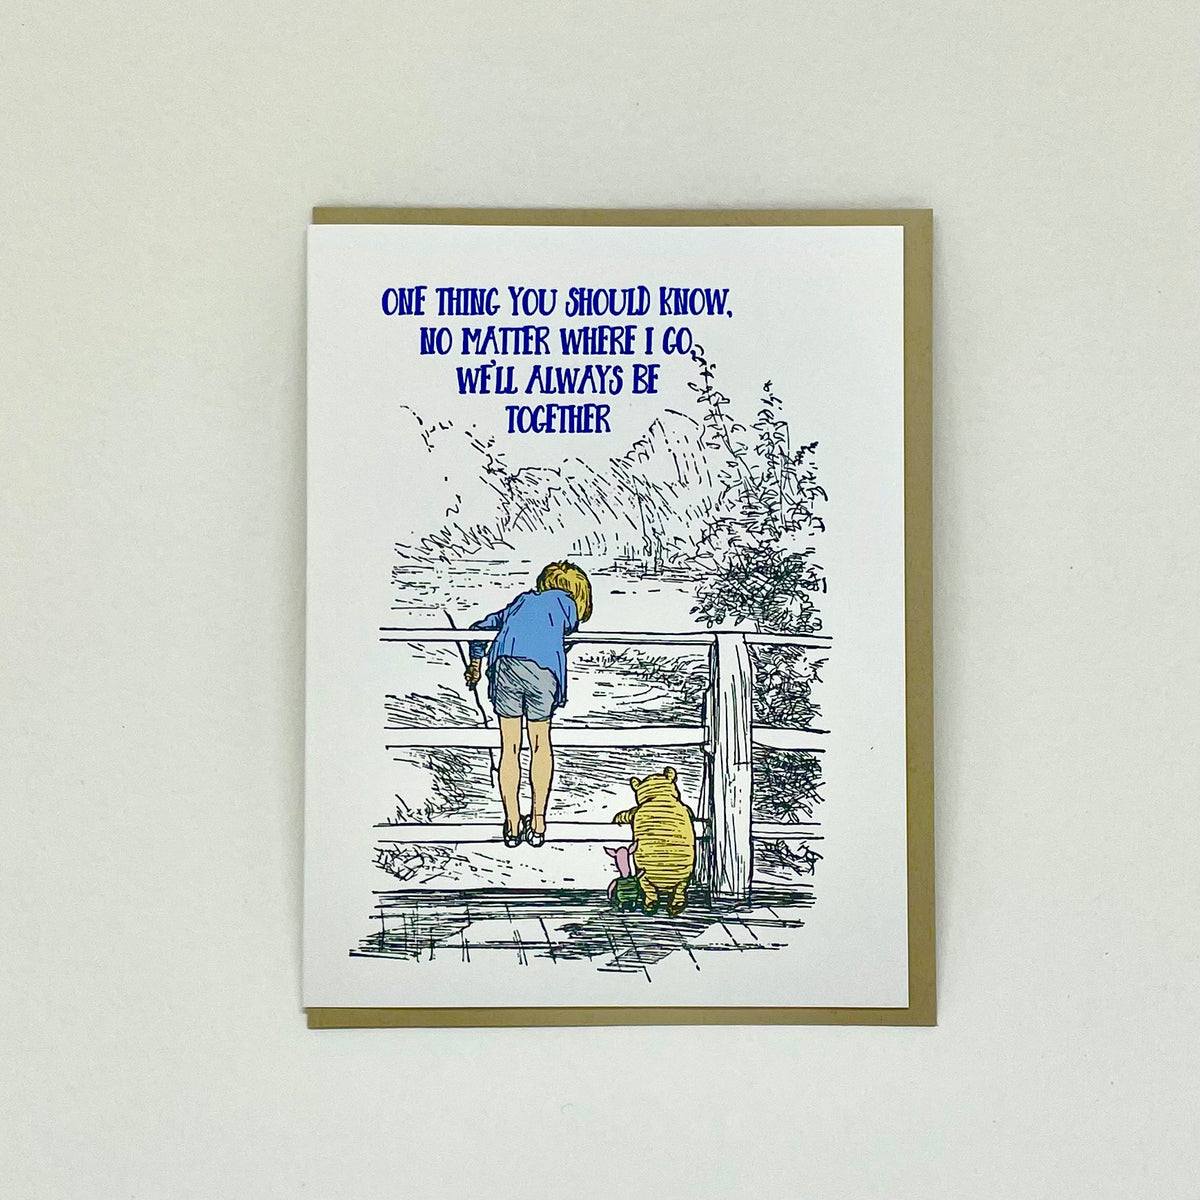 We'll Always be Together - Pooh Card